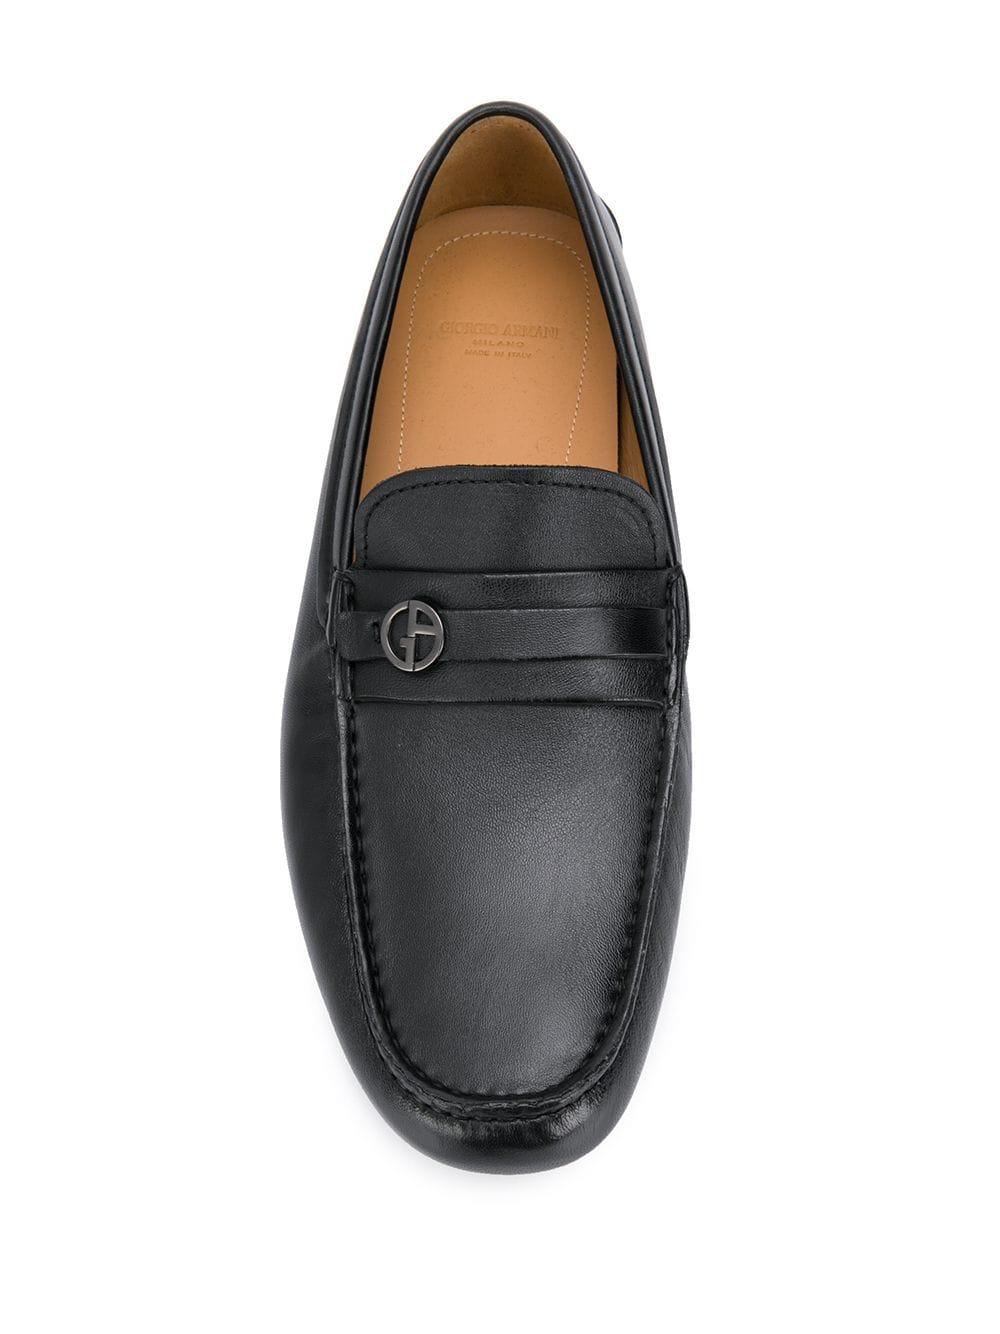 Giorgio Armani Leather Monogrammed Loafers in Black for Men - Lyst